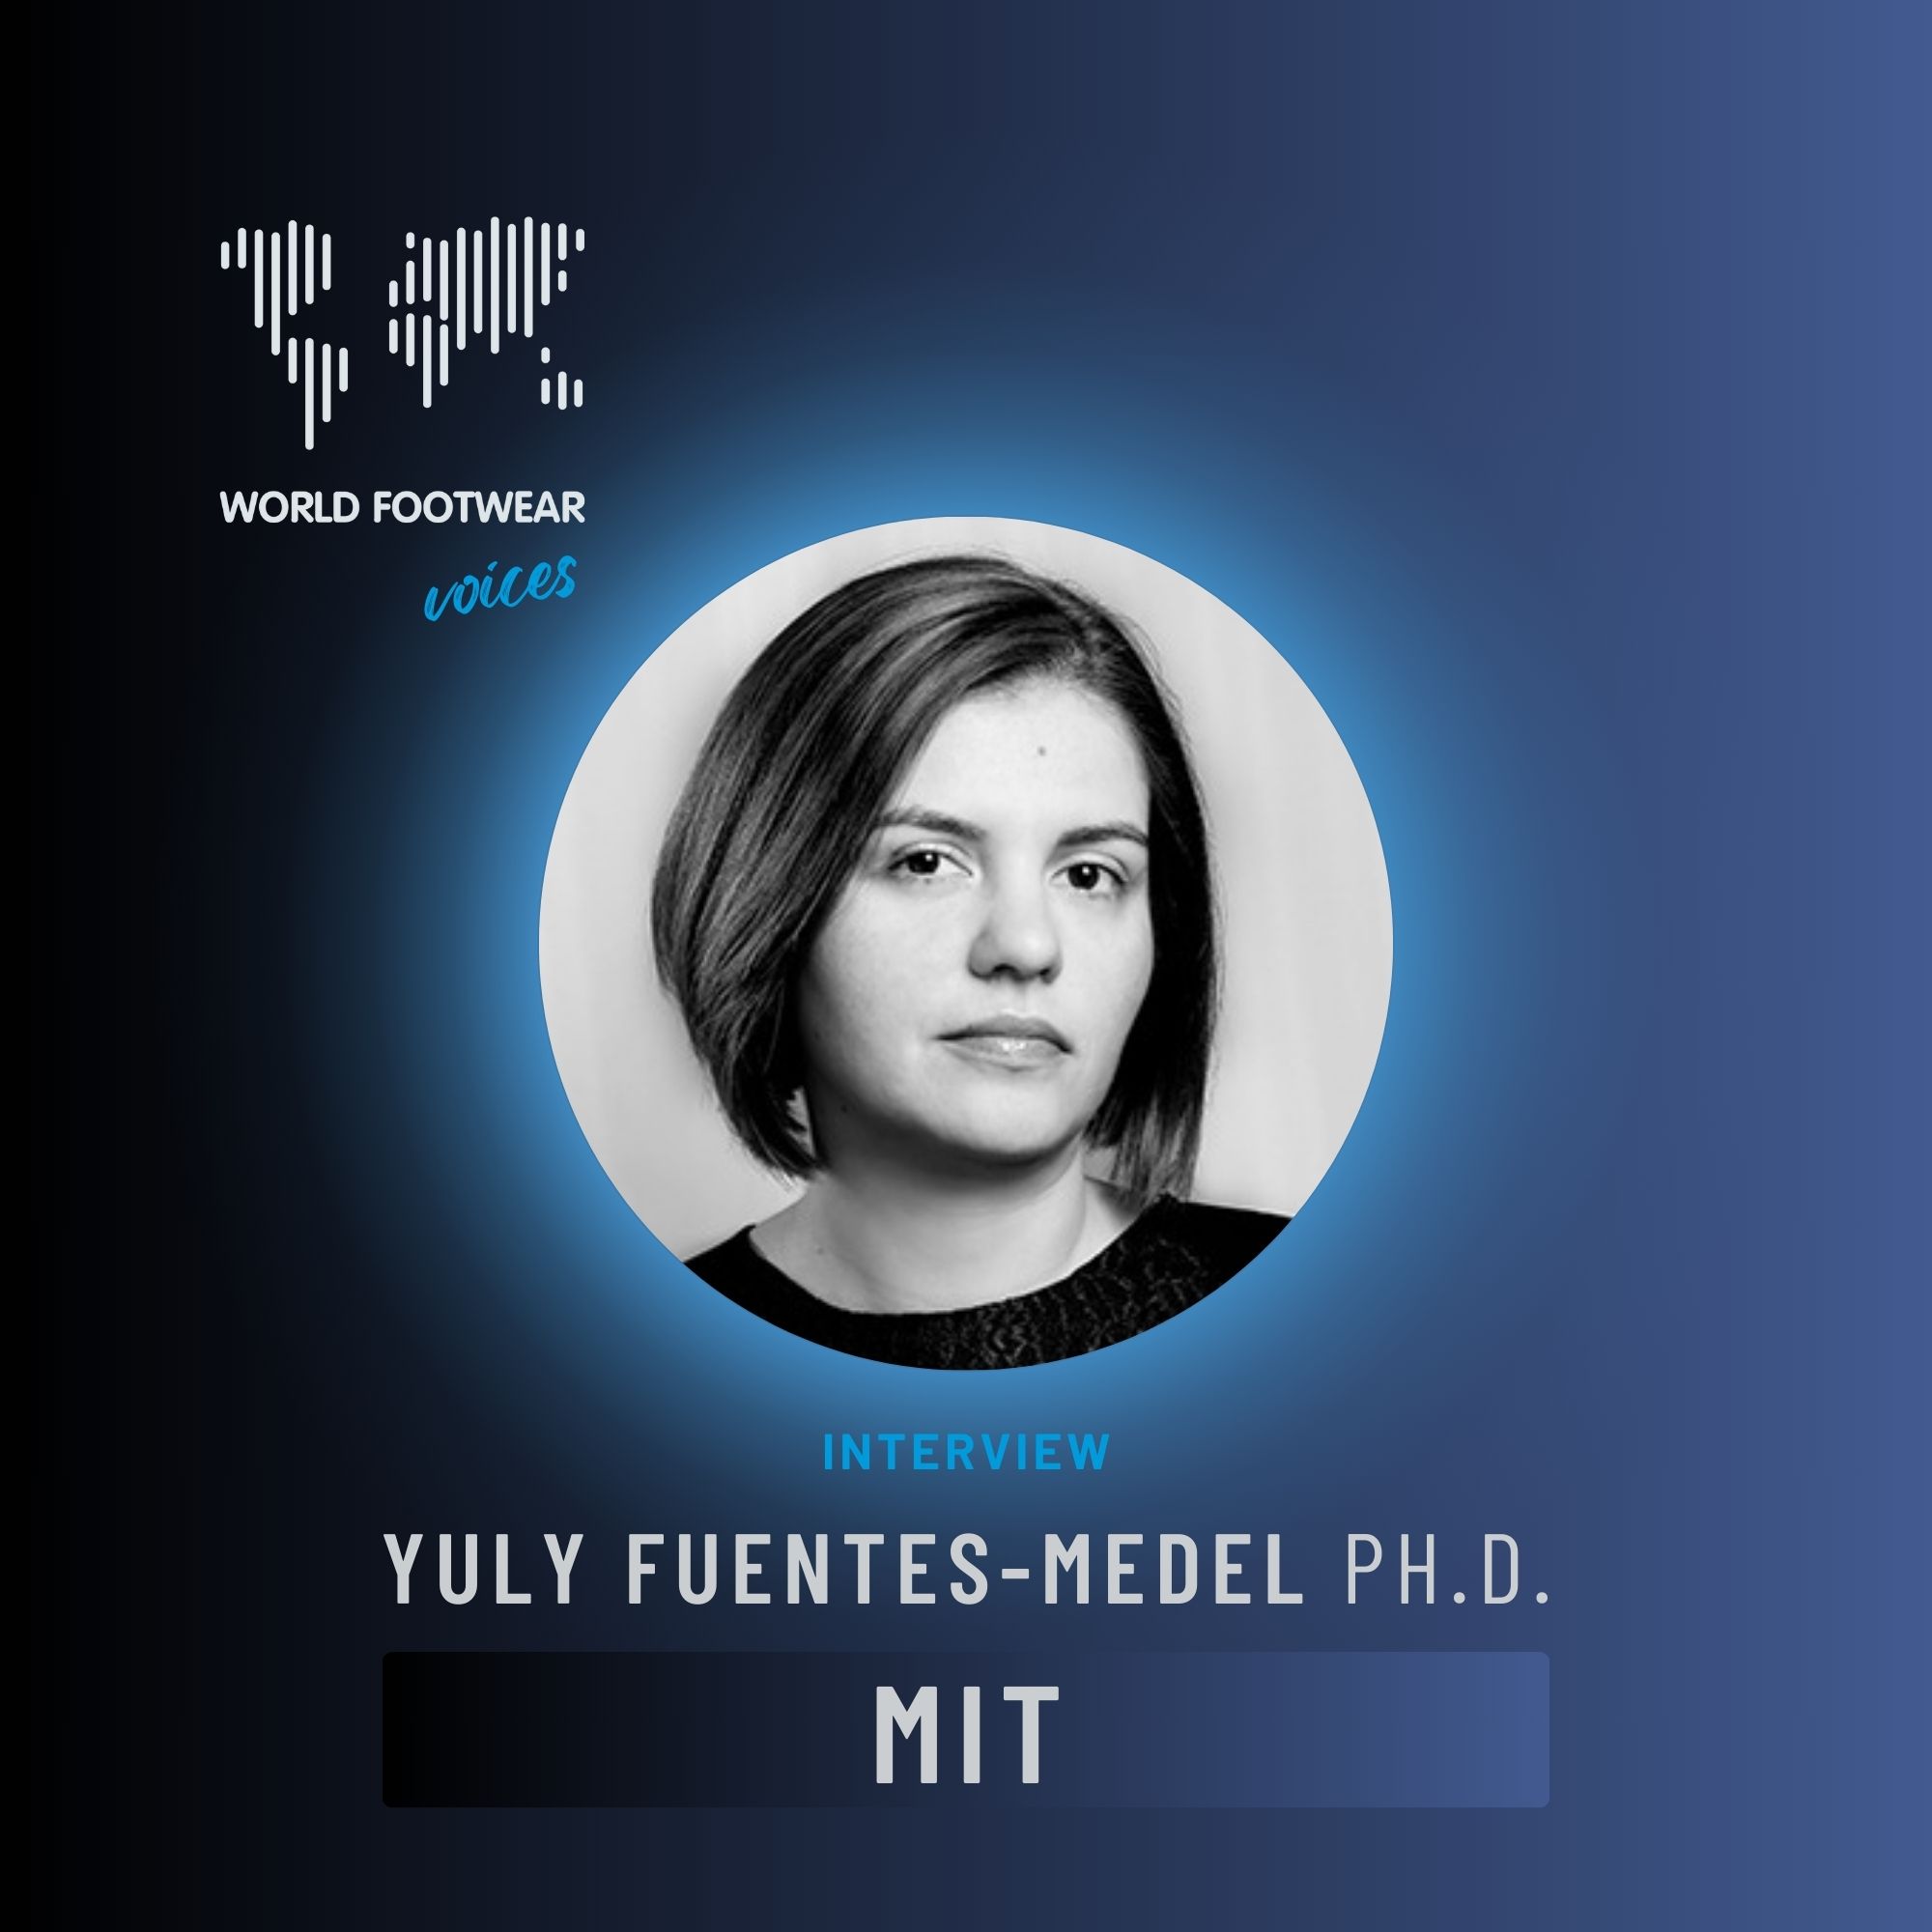 World Footwear Voices: interview with Yuly Fuentes-Medel Ph.D. from MIT